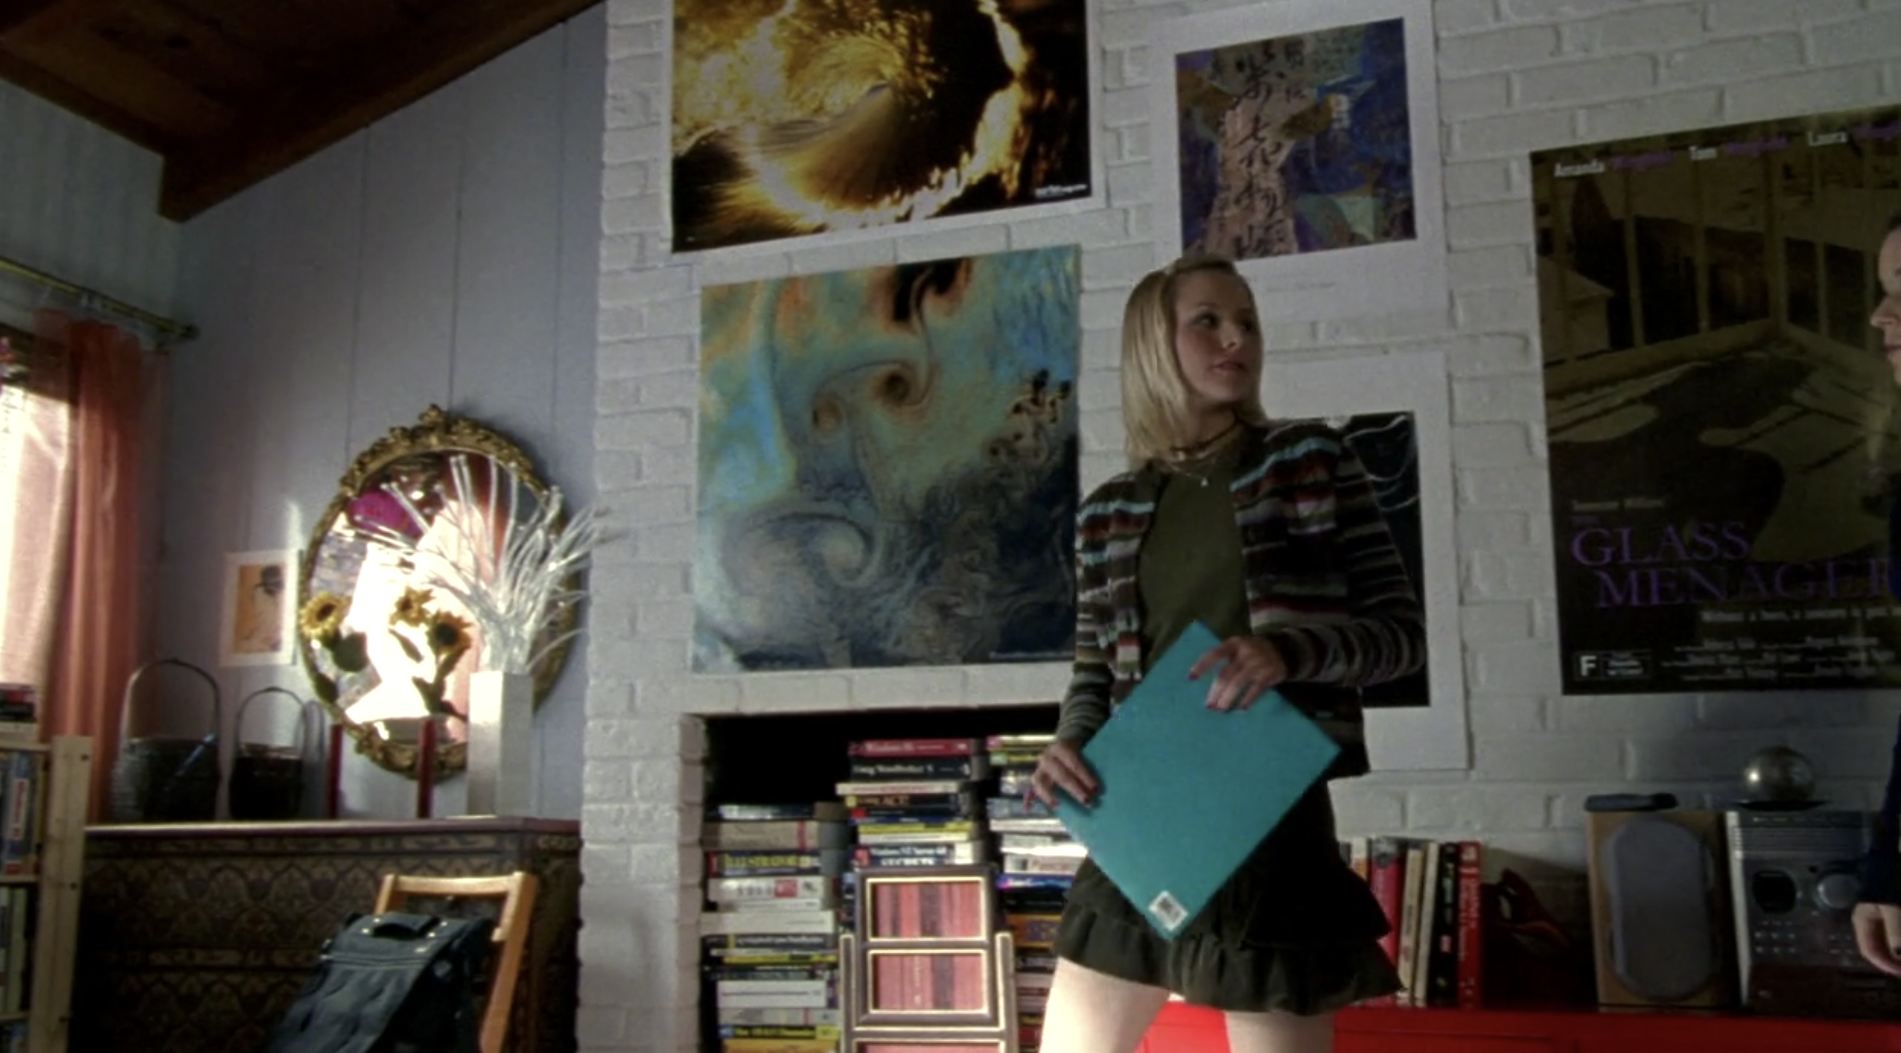 Screenshot of S1E11 of Veronica Mars. Veronica is holding an aqua colored folder and is looking over her shoulder at Mac. They're in Mac's bedroom which has lots of posters on the white brick wall, a circular mirror, some sunflowers, and a lot of books.